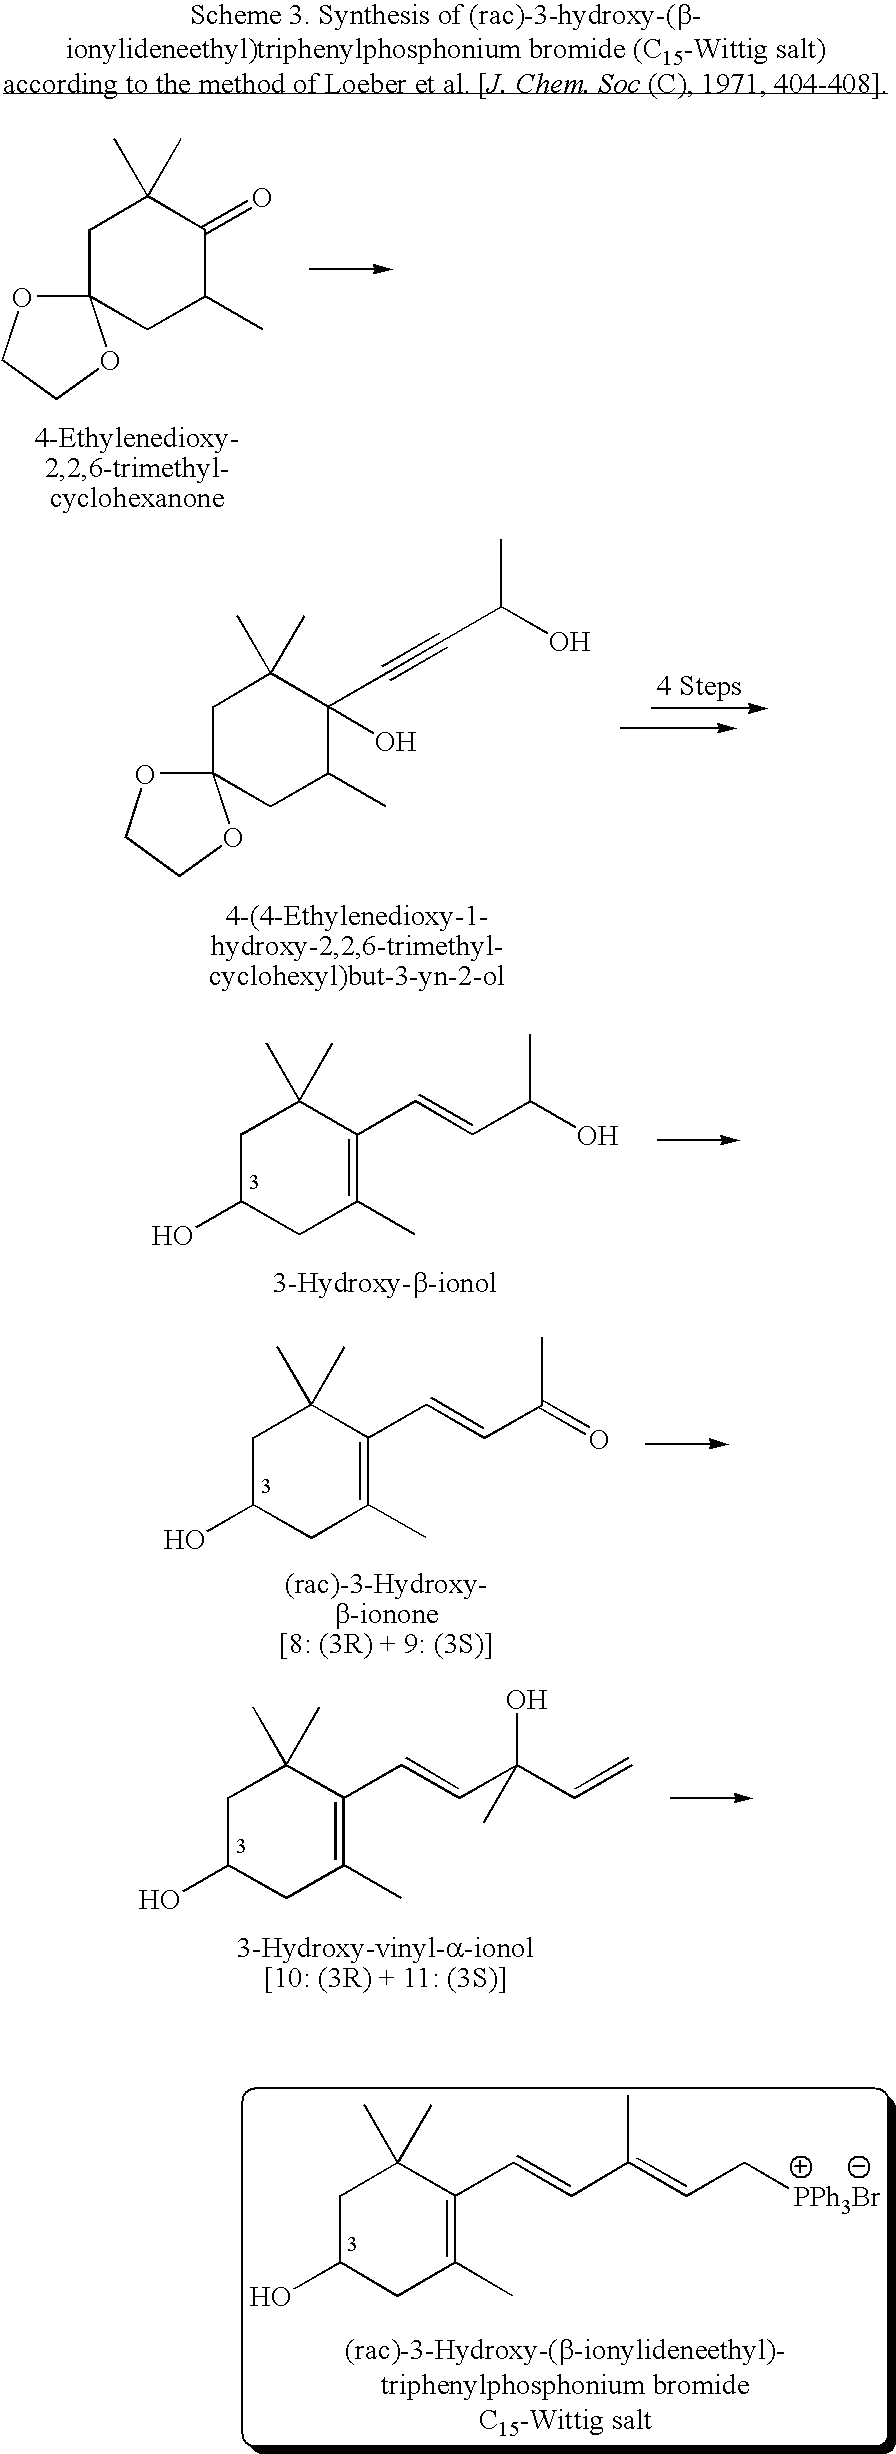 Process for Synthesis of (3S)- and (3R)-3-Hydroxy-Beta-Ionone, and Their Transformation to Zeaxanthin and Beta-Cryptoxanthin